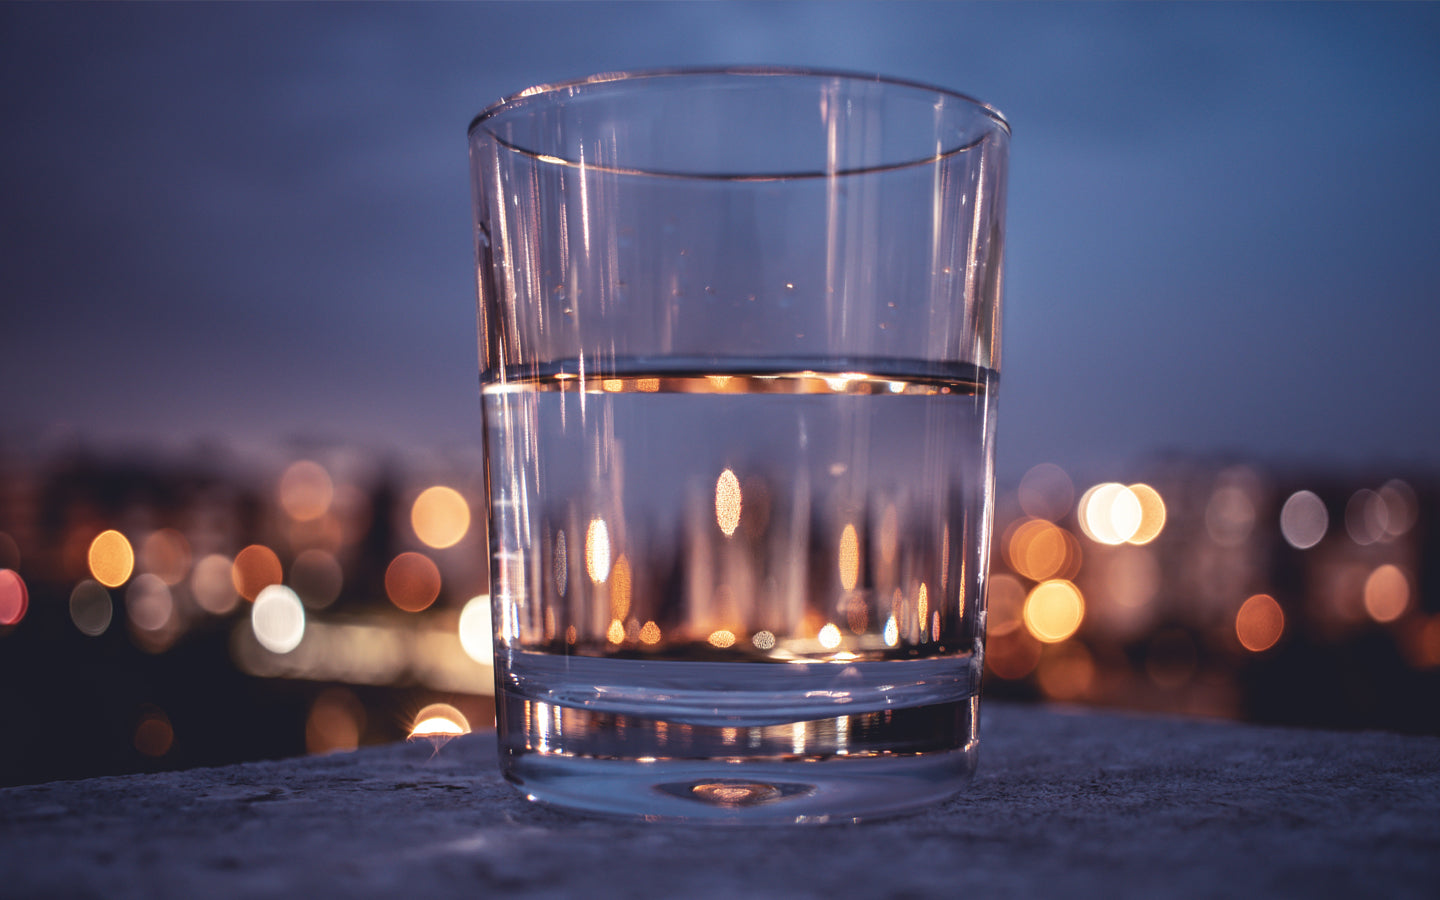 Ask the Expert: Why am I Thirsty at Night?